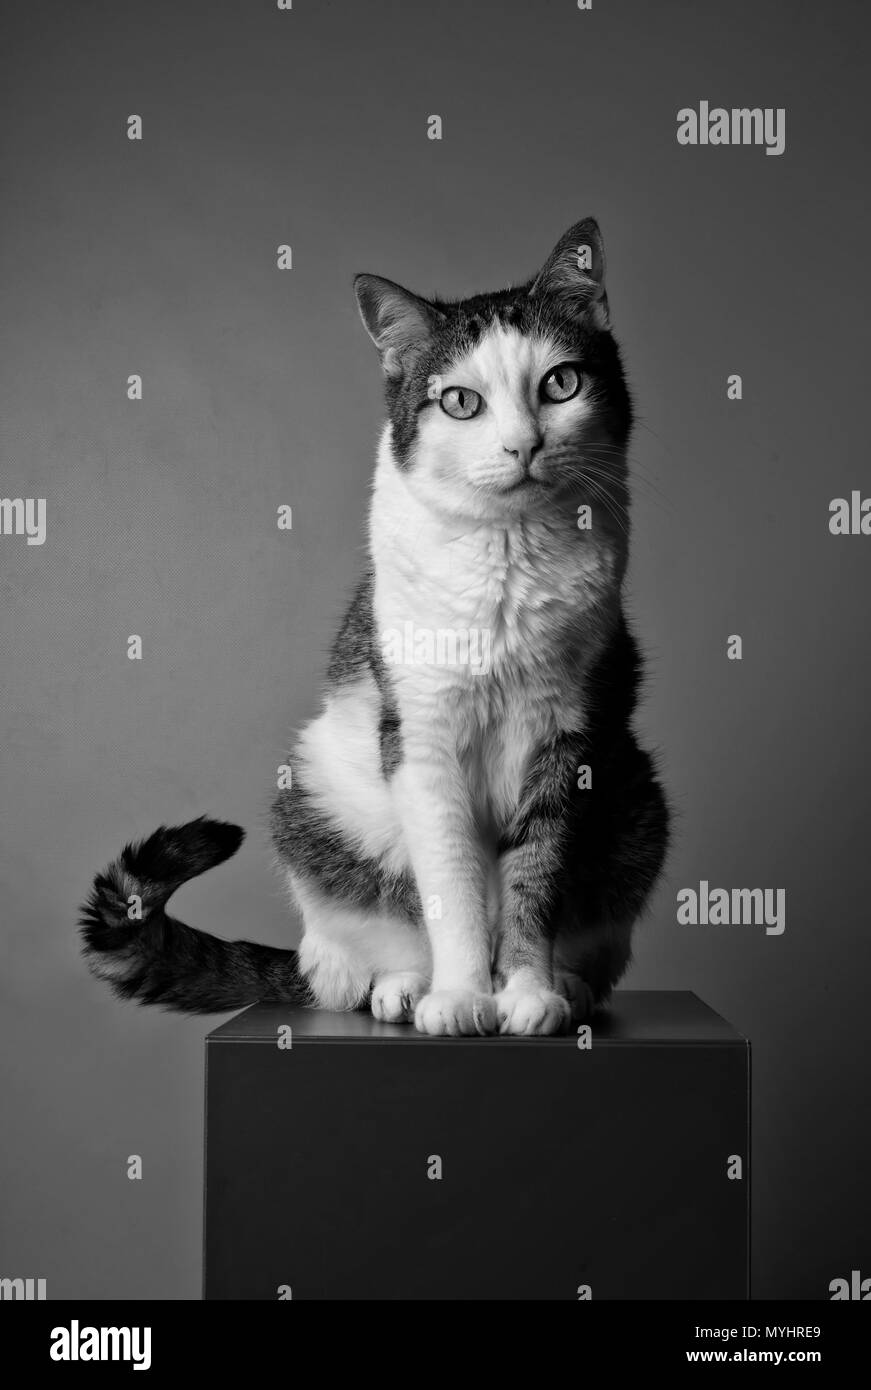 Black and white portrait of a tabby cat looking curious to the camera. Stock Photo